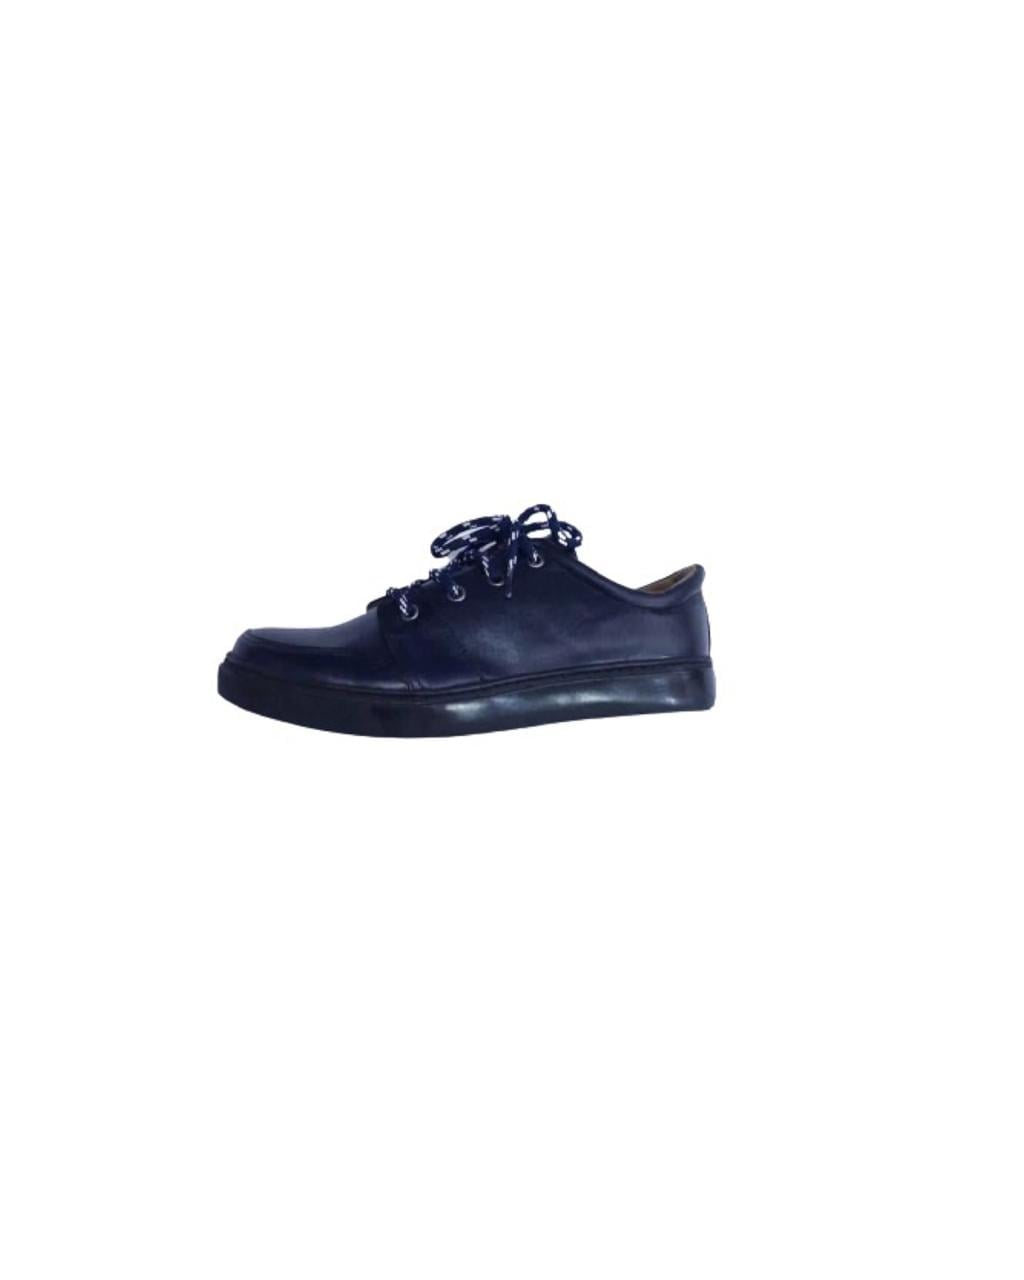 RALPH Casual Shoes Round Toe Navy For Boys With Laces